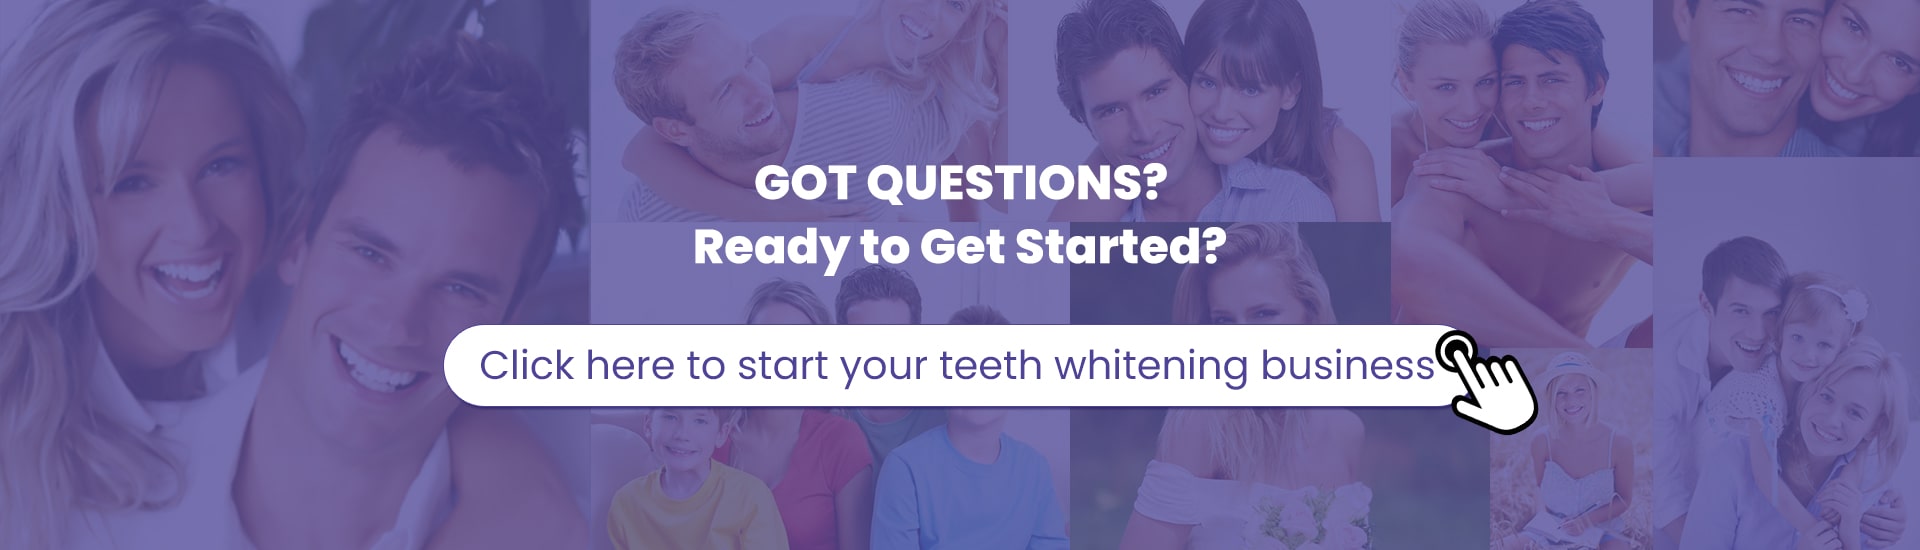 Contact us to start your teeth whitening business